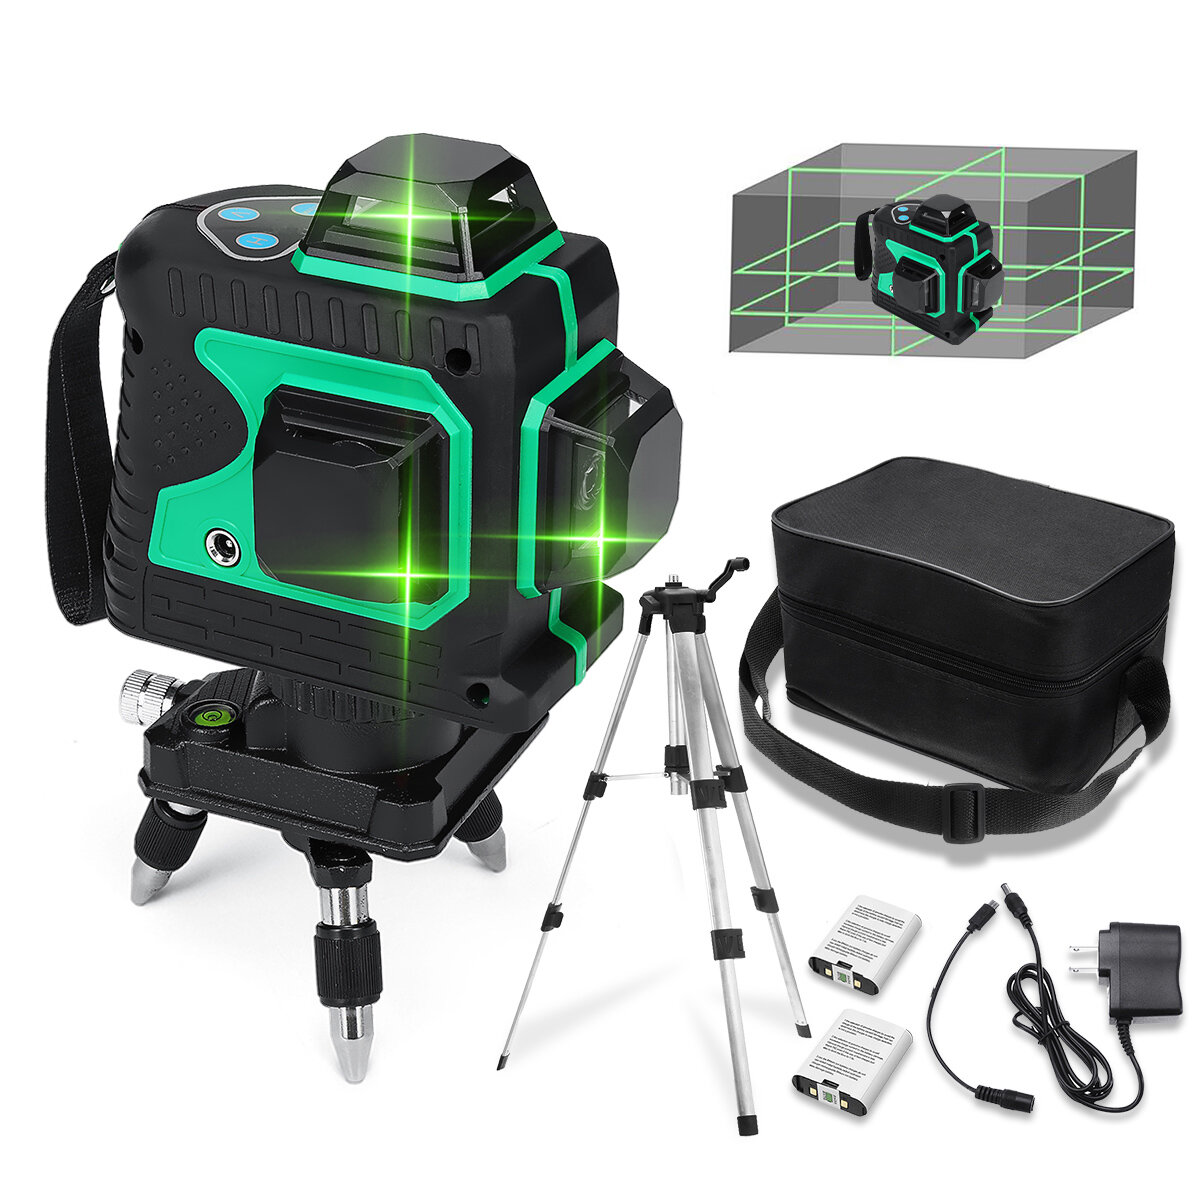 MUSTOOL 3D Green Auto Laser Level 12 Lines 360° Horizontal & Vertical Cross Build Tool Measuring Tools with 2 Batteries